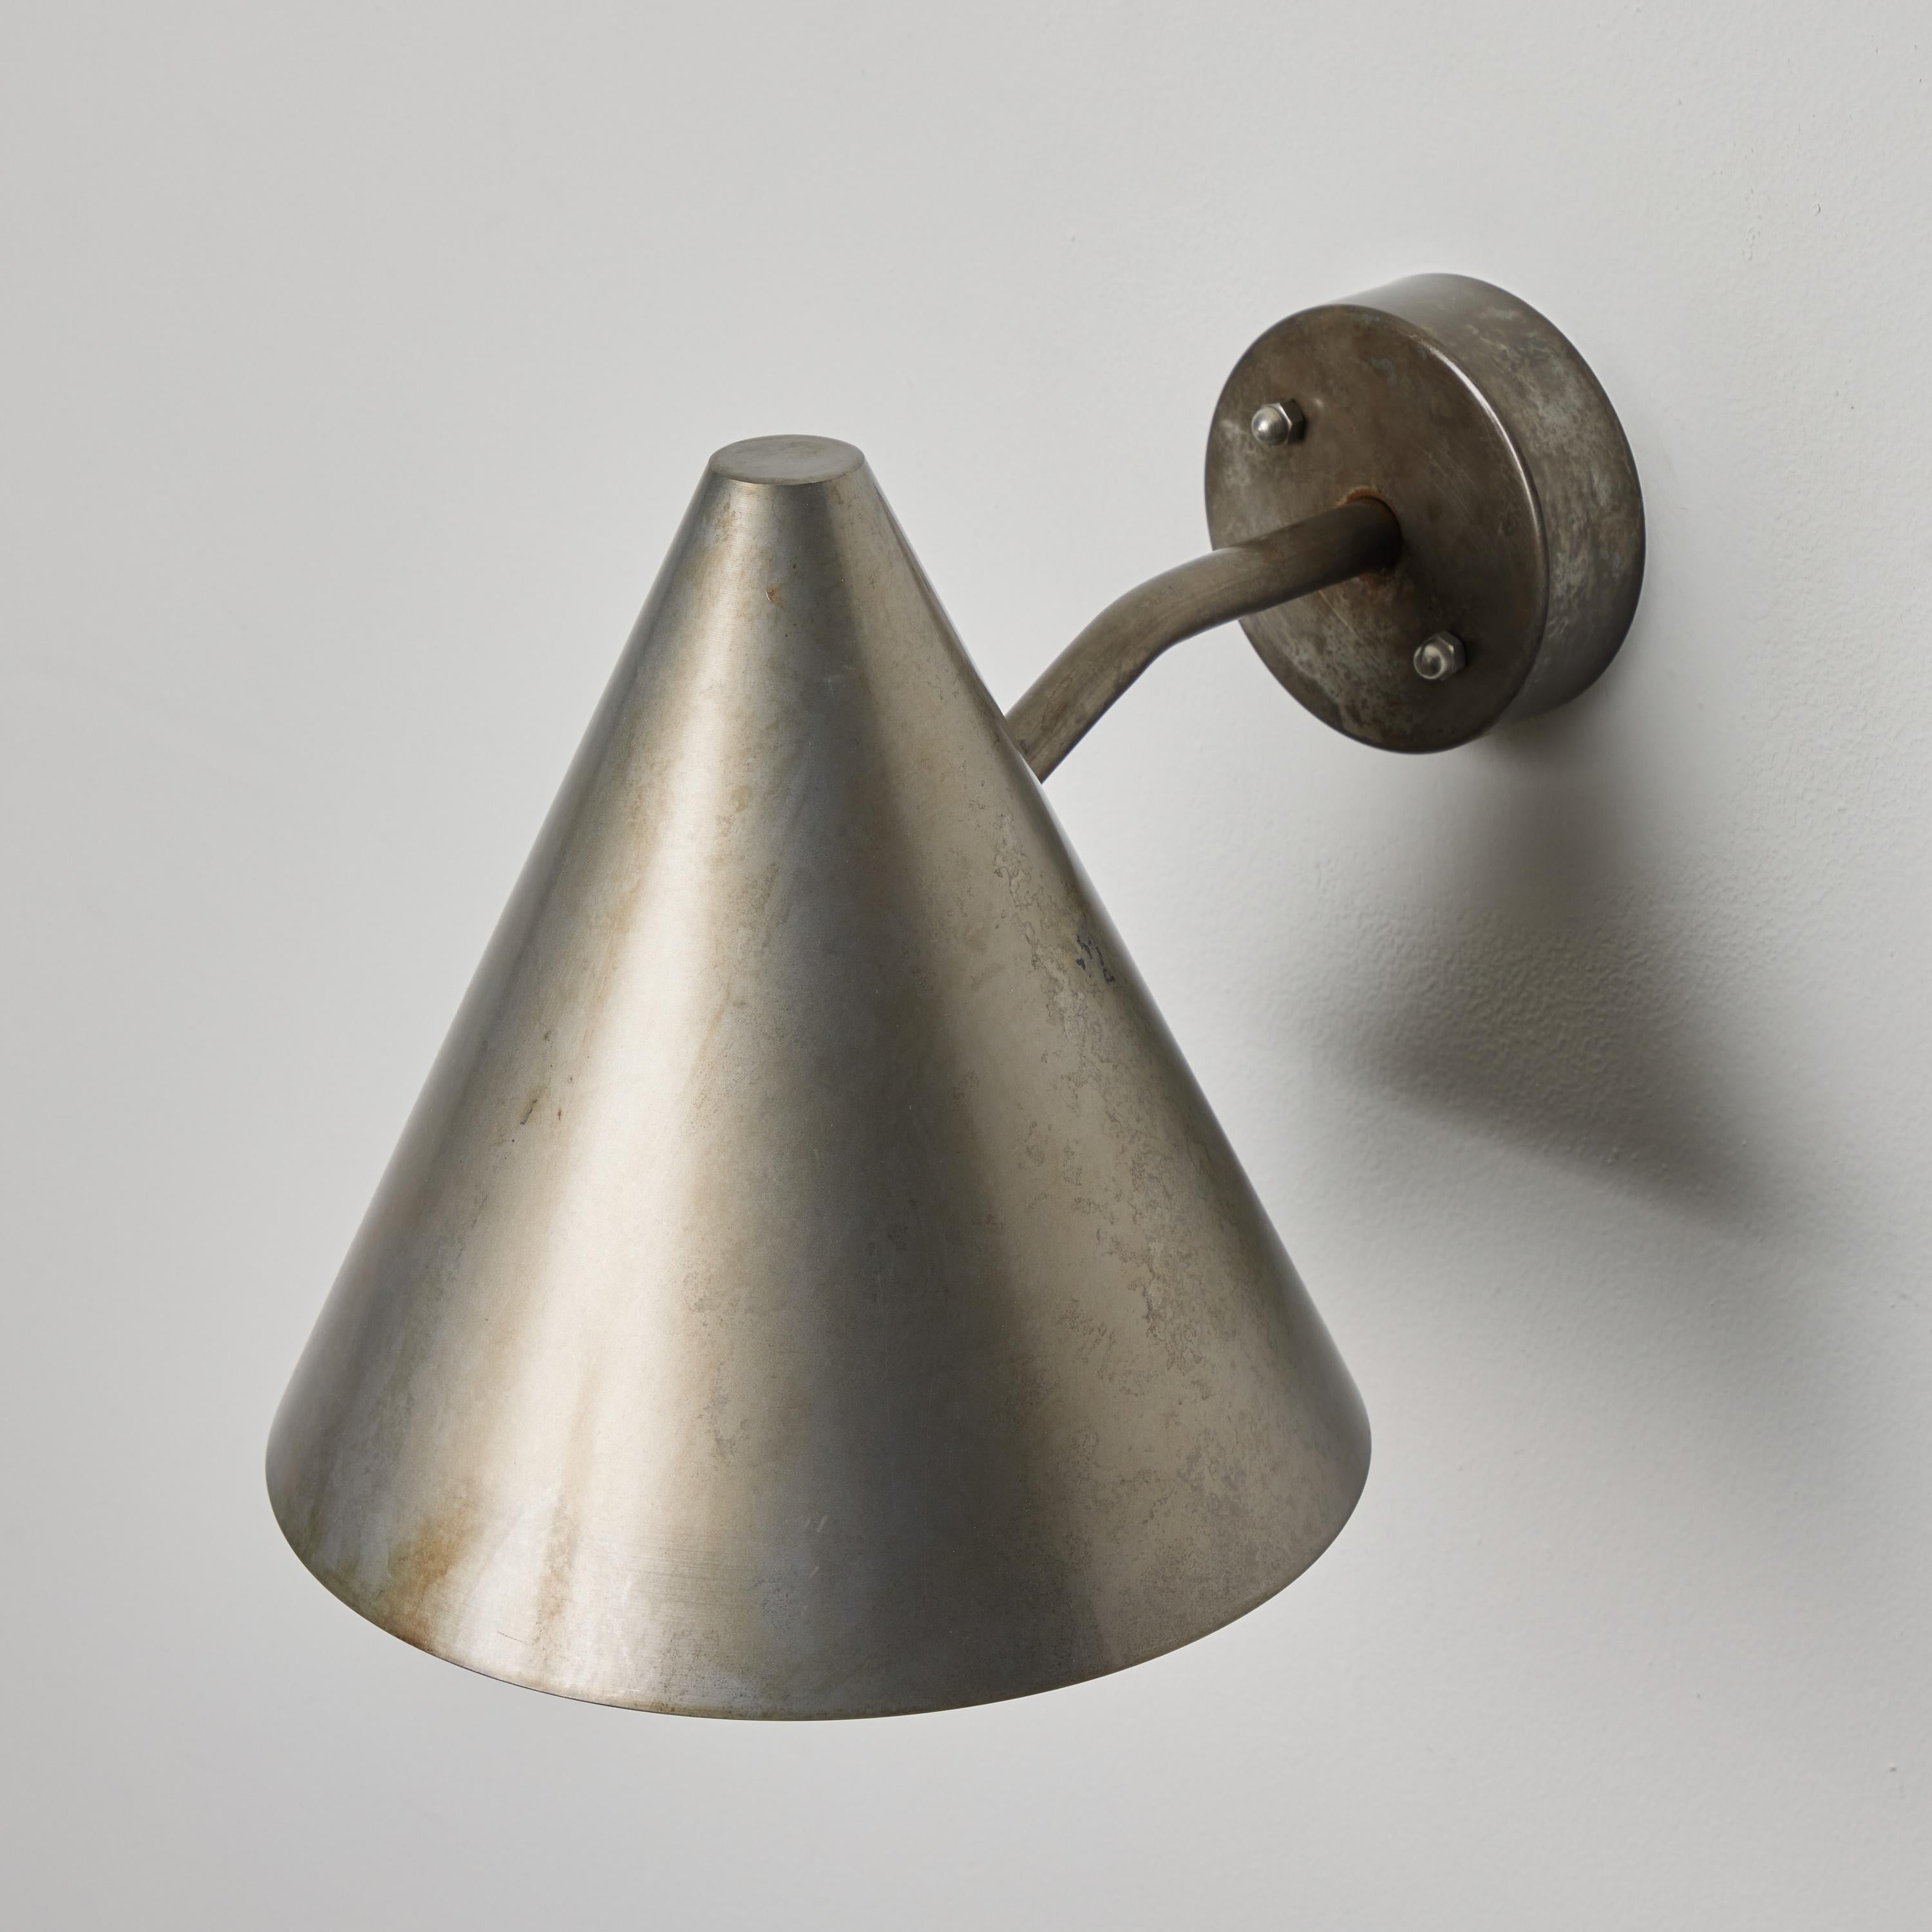 Hans-Agne Jakobsson 'Tratten' Outdoor Sconce in Silver Steel. A classic Swedish design executed in solid steel. An incredibly refined design that is quintessentially Scandinavian, ideal for indoor or outdoor use.

Price is per item. A limited run of